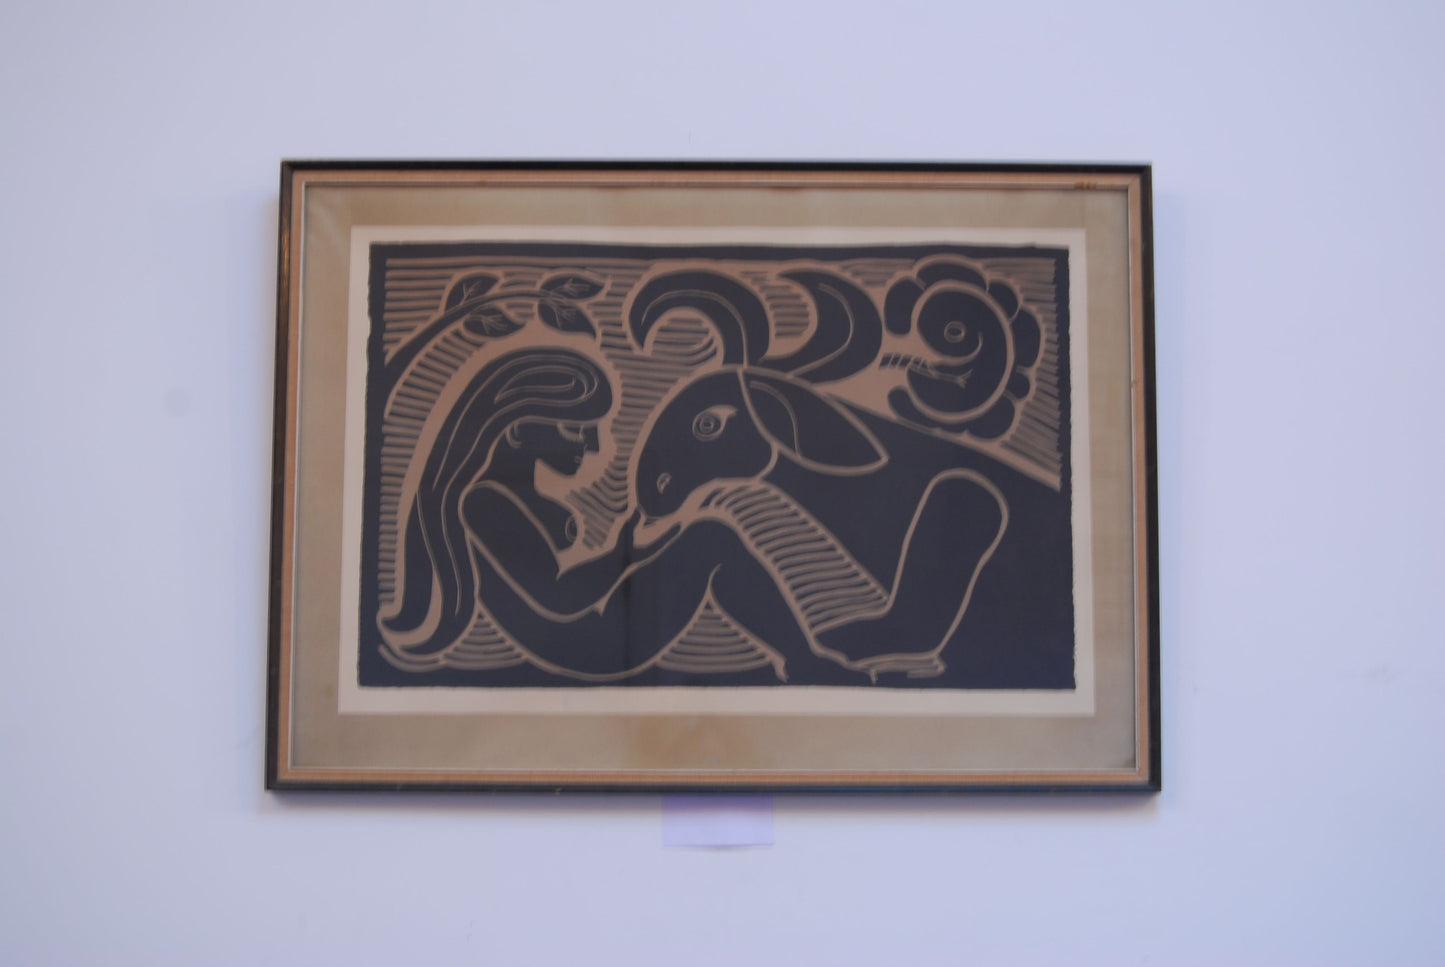 Framed lithograph by Henry Heerup